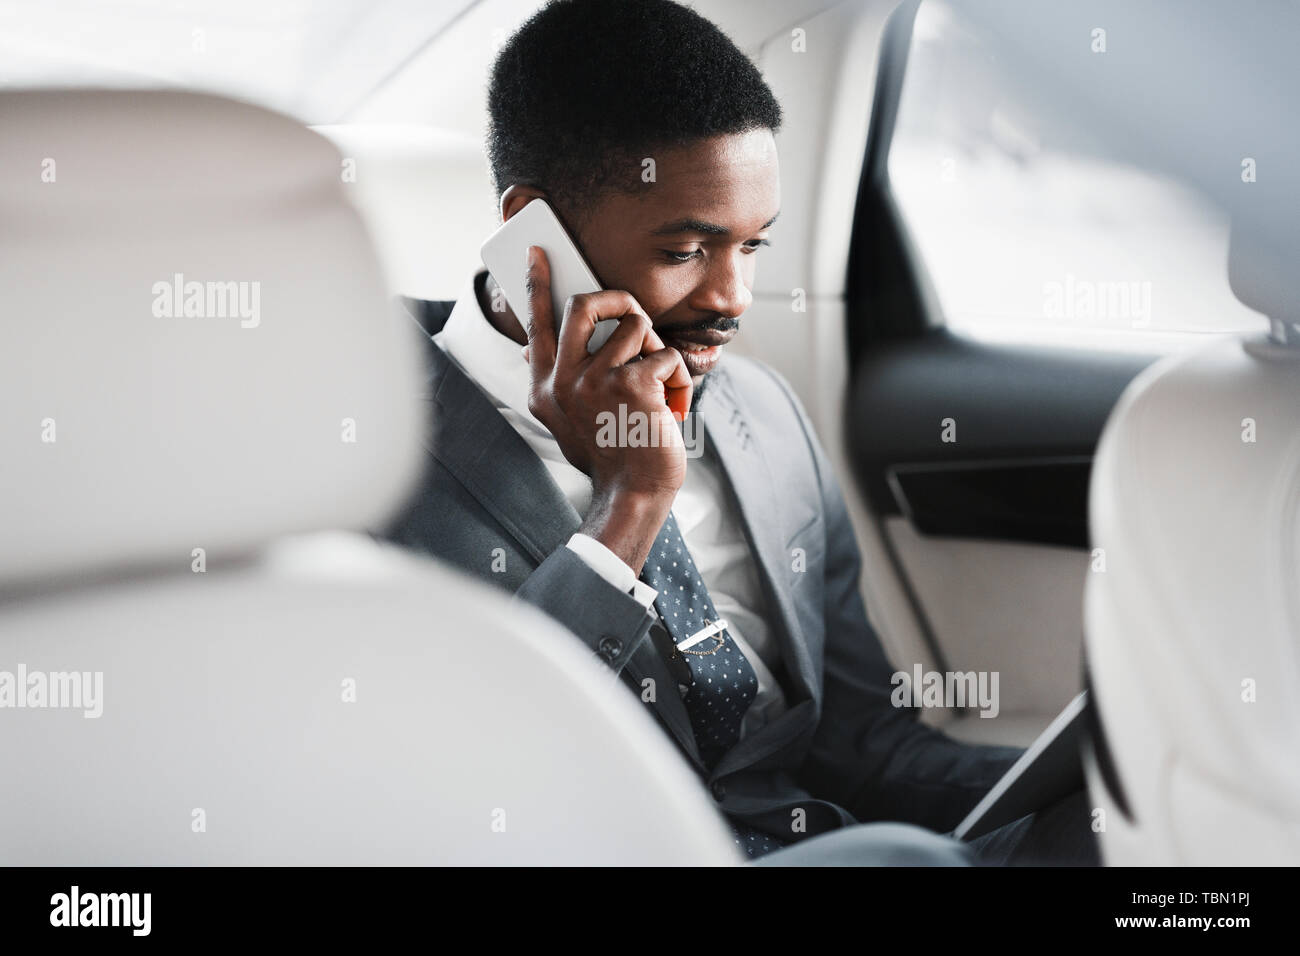 Business Trip. Man Talking On Phone And Discussing Work Stock Photo